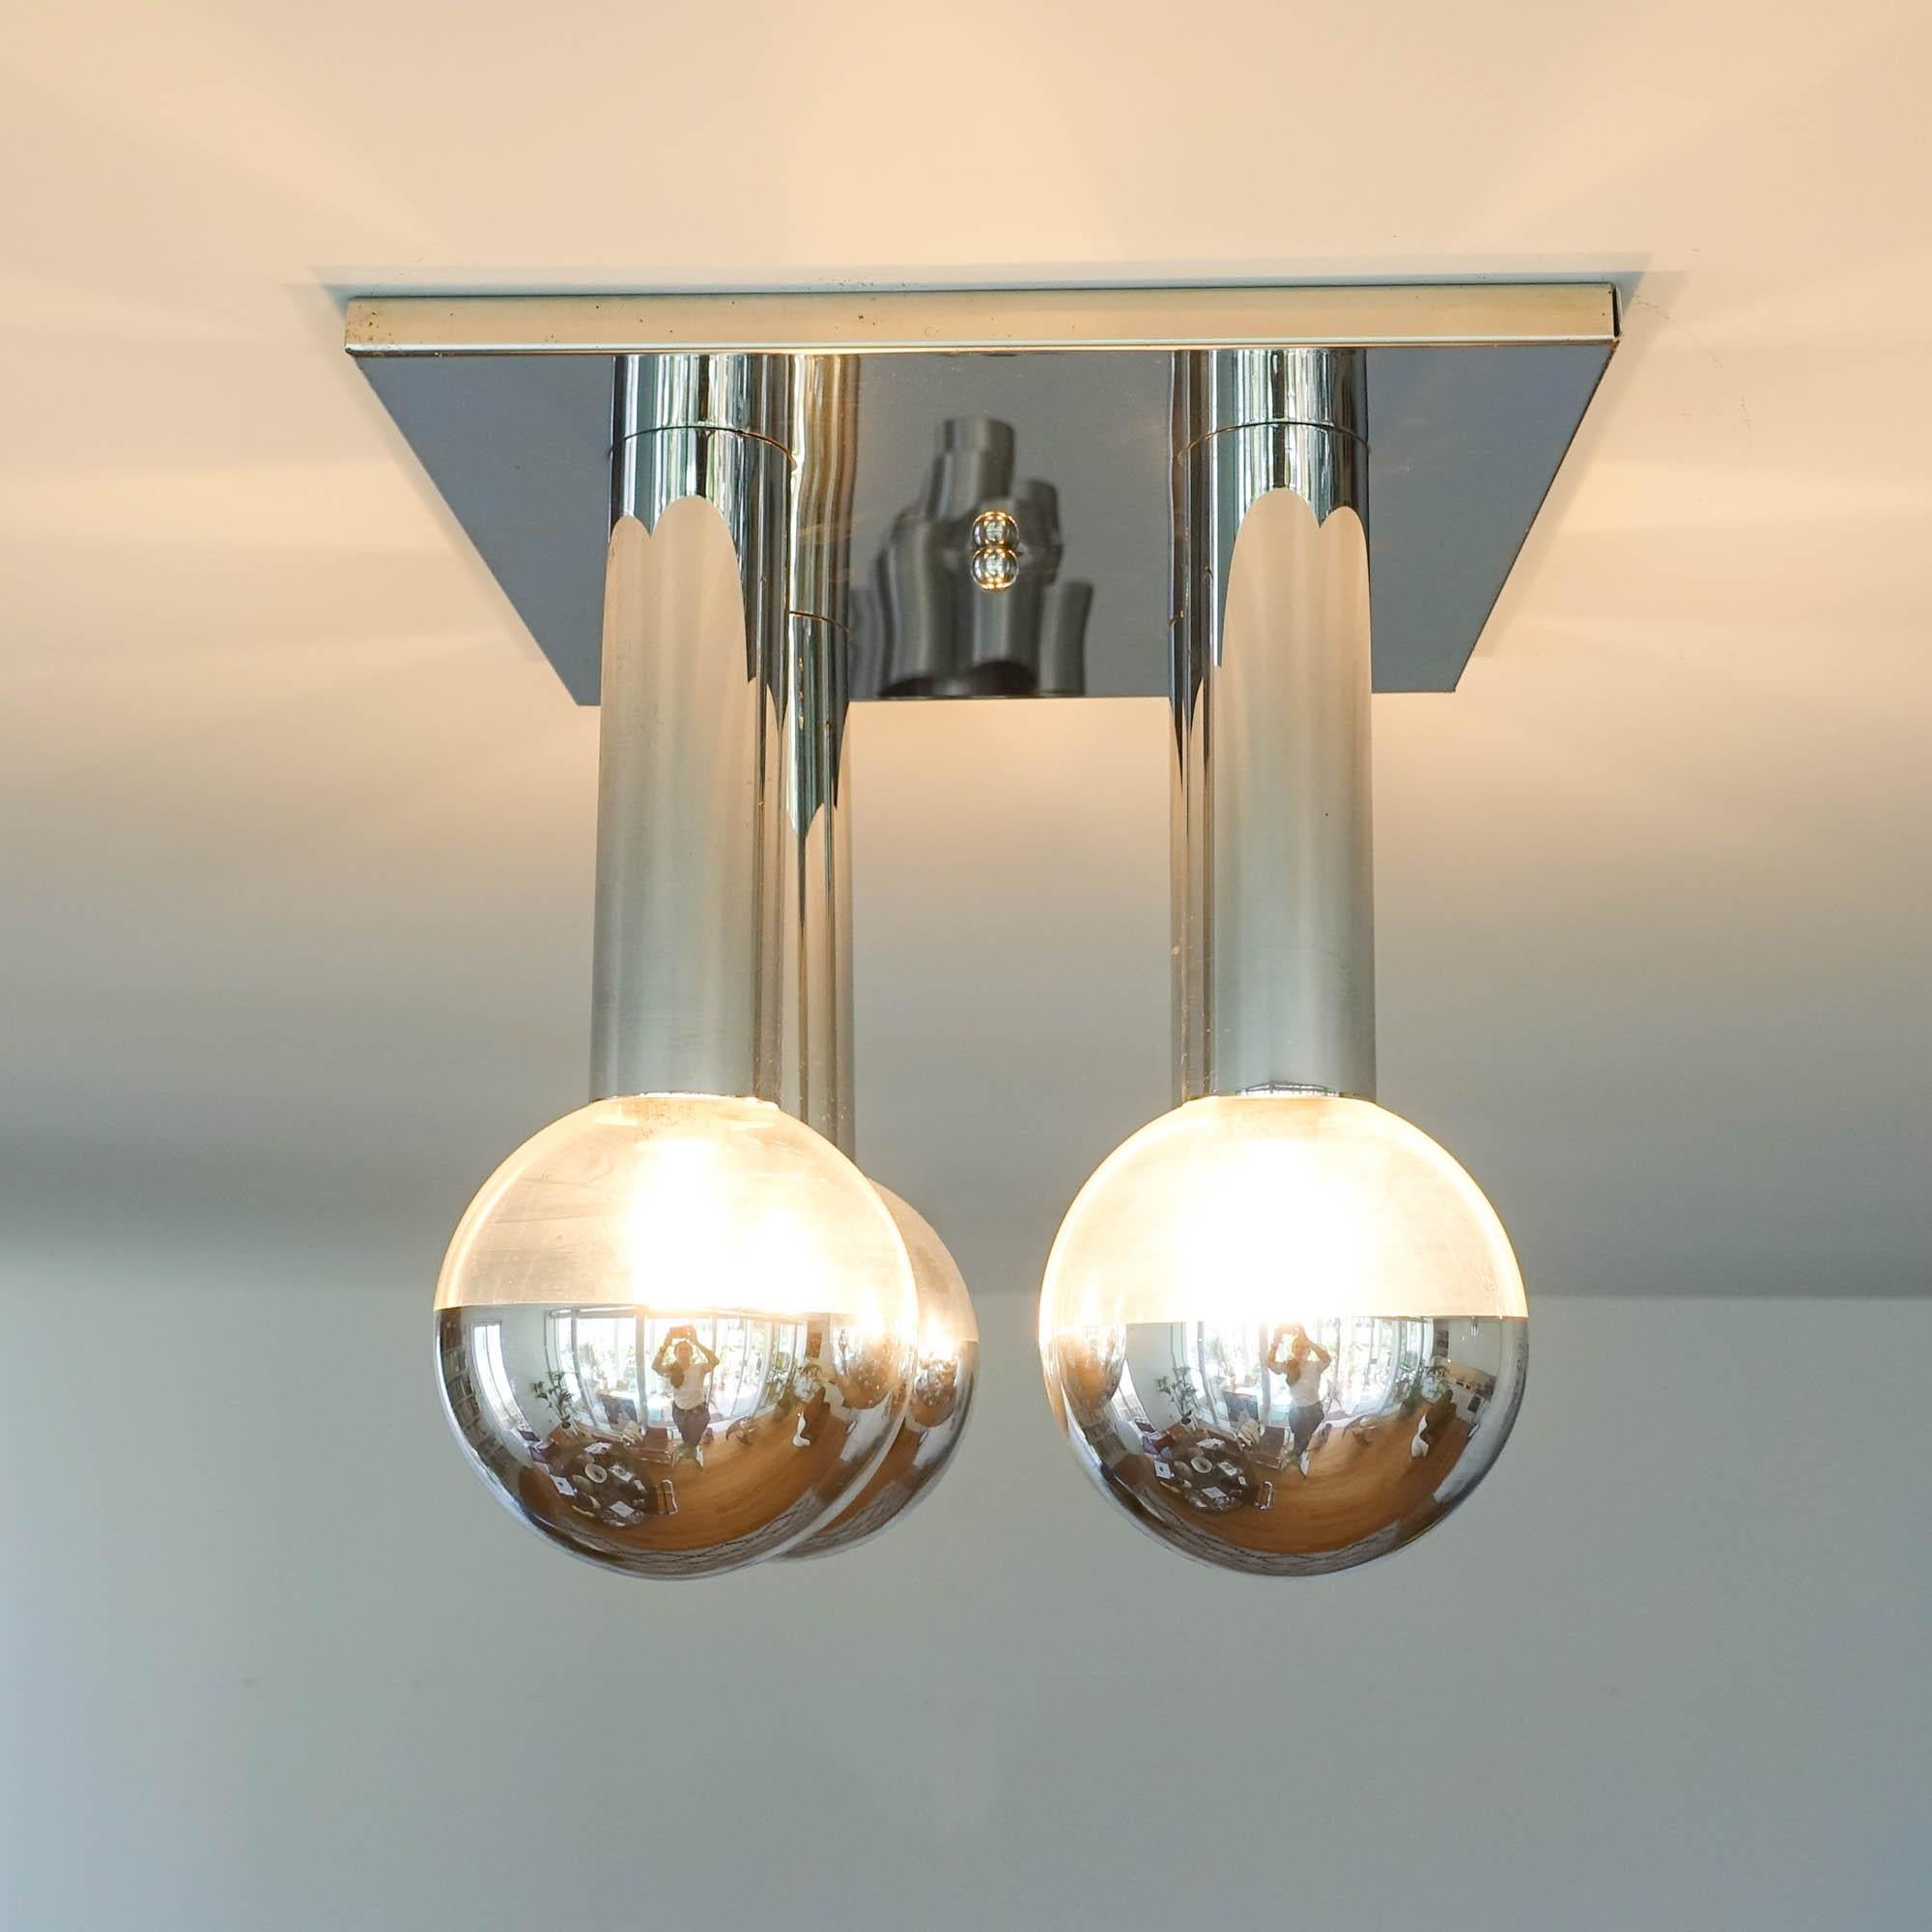 German Vintage Space Age Ceiling Lamp by Motoko Ishii for Staff, 1970s